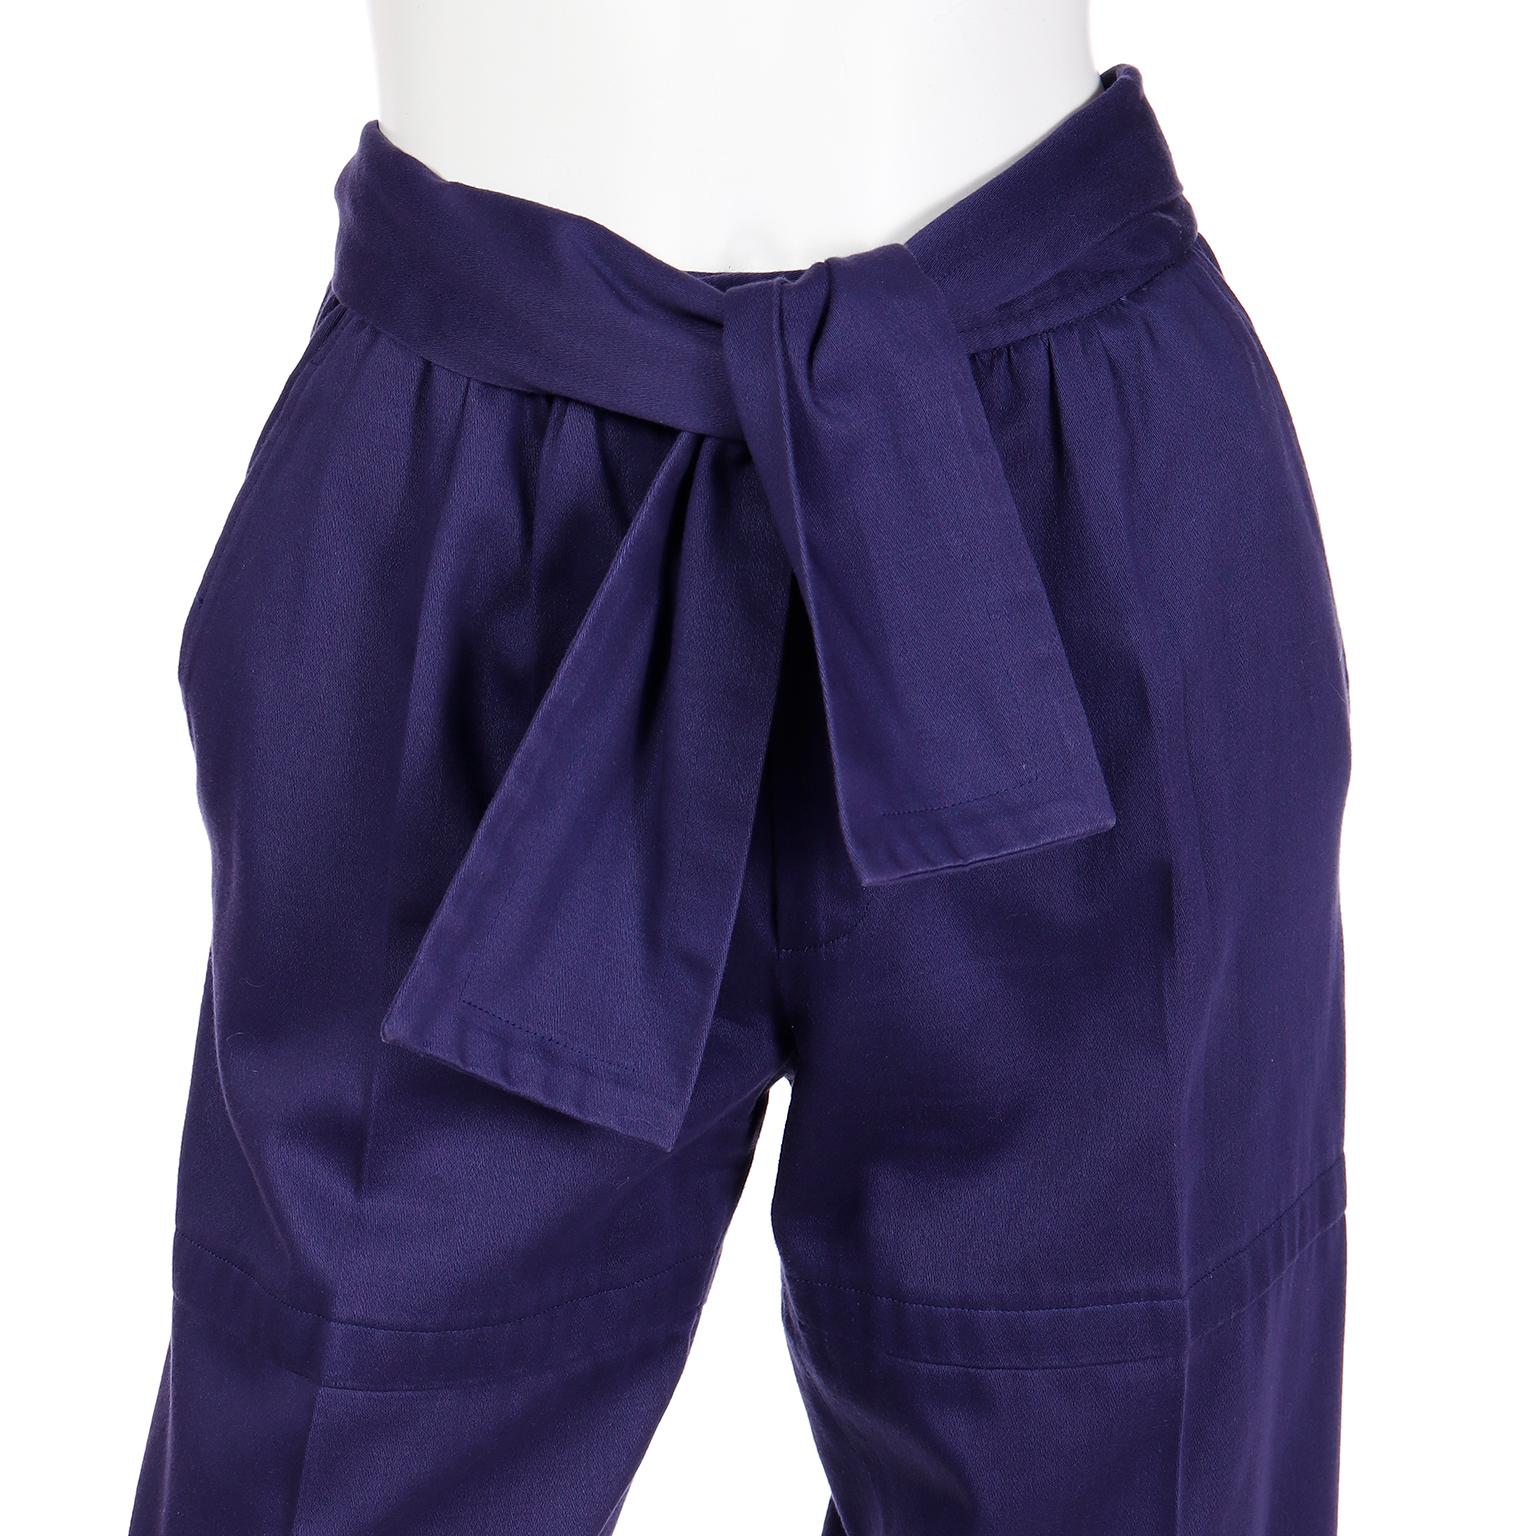 Yves Saint Laurent YSL Vintage Deep Purple Cotton Trousers W Self Tie Sash Belt In Excellent Condition For Sale In Portland, OR